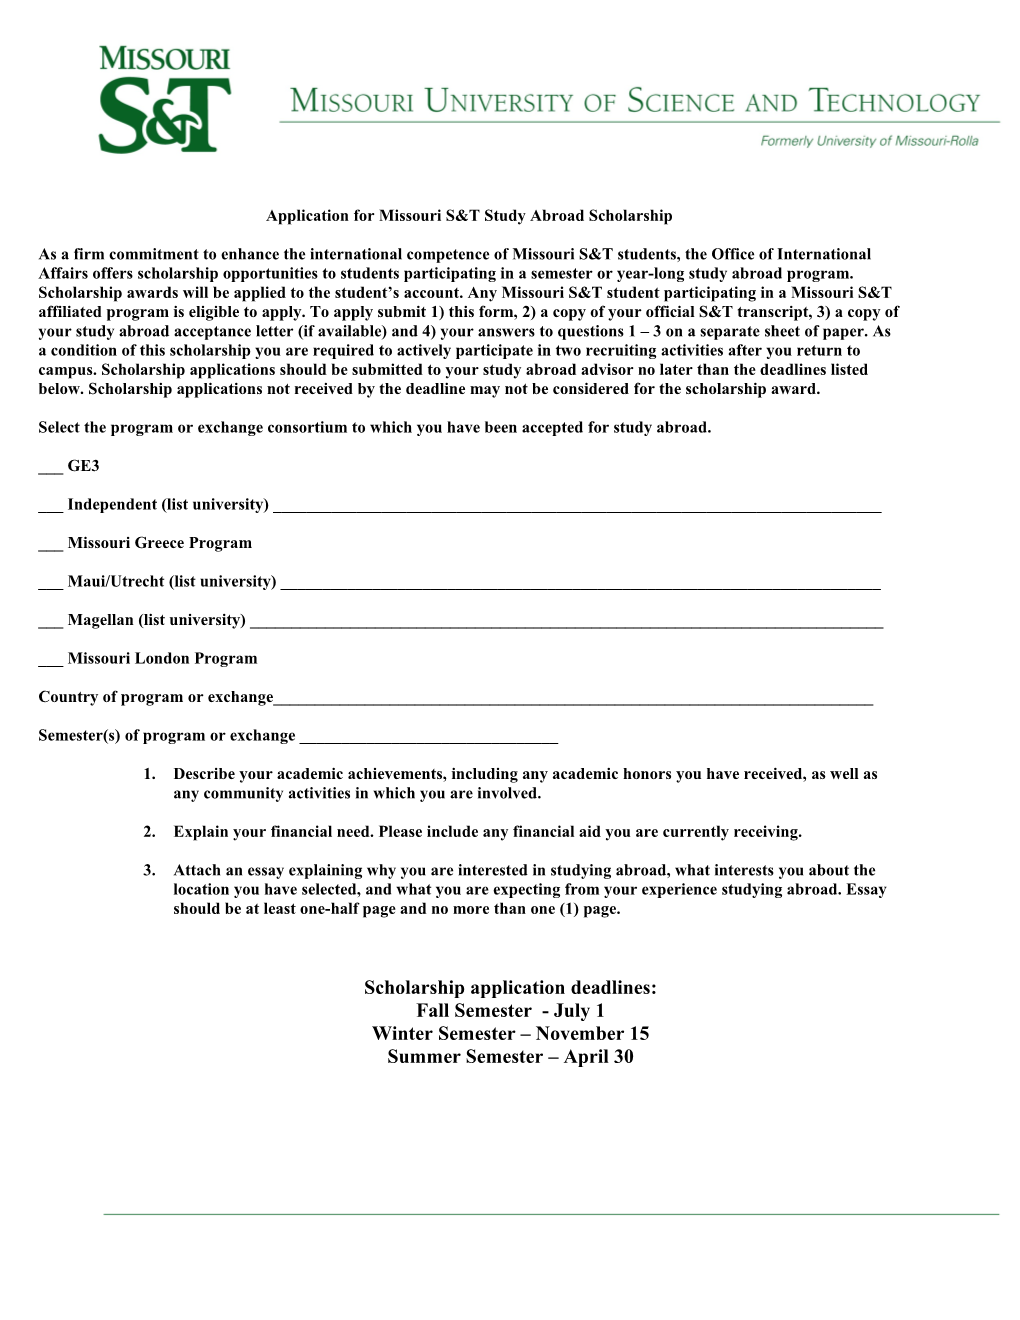 Application for Missouri S&T Study Abroad Scholarship